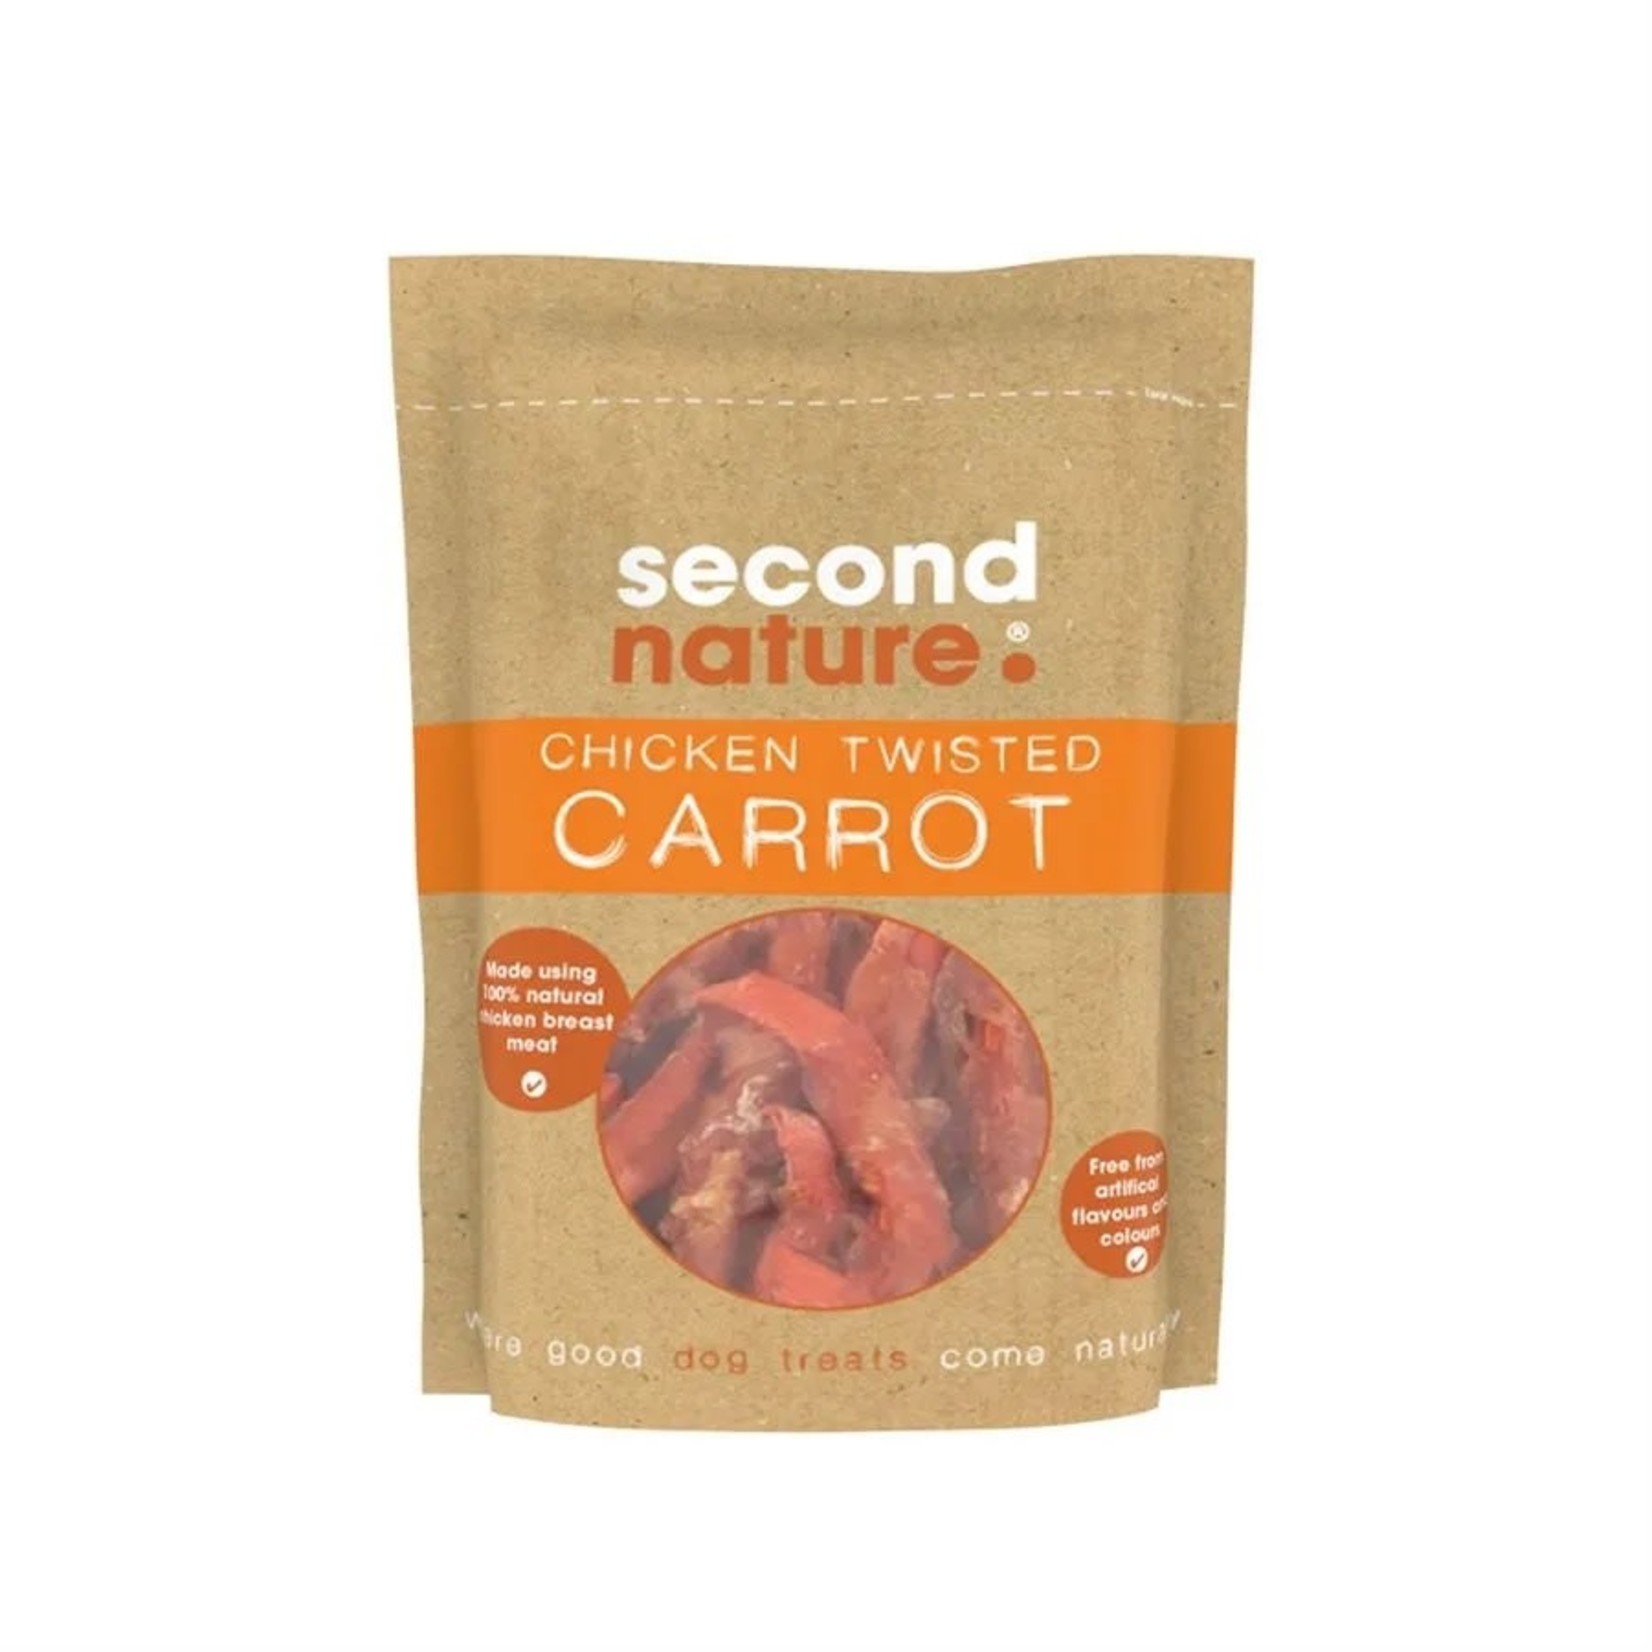 Second Nature Chicken Twisted Carrot Dog Treats, 85g